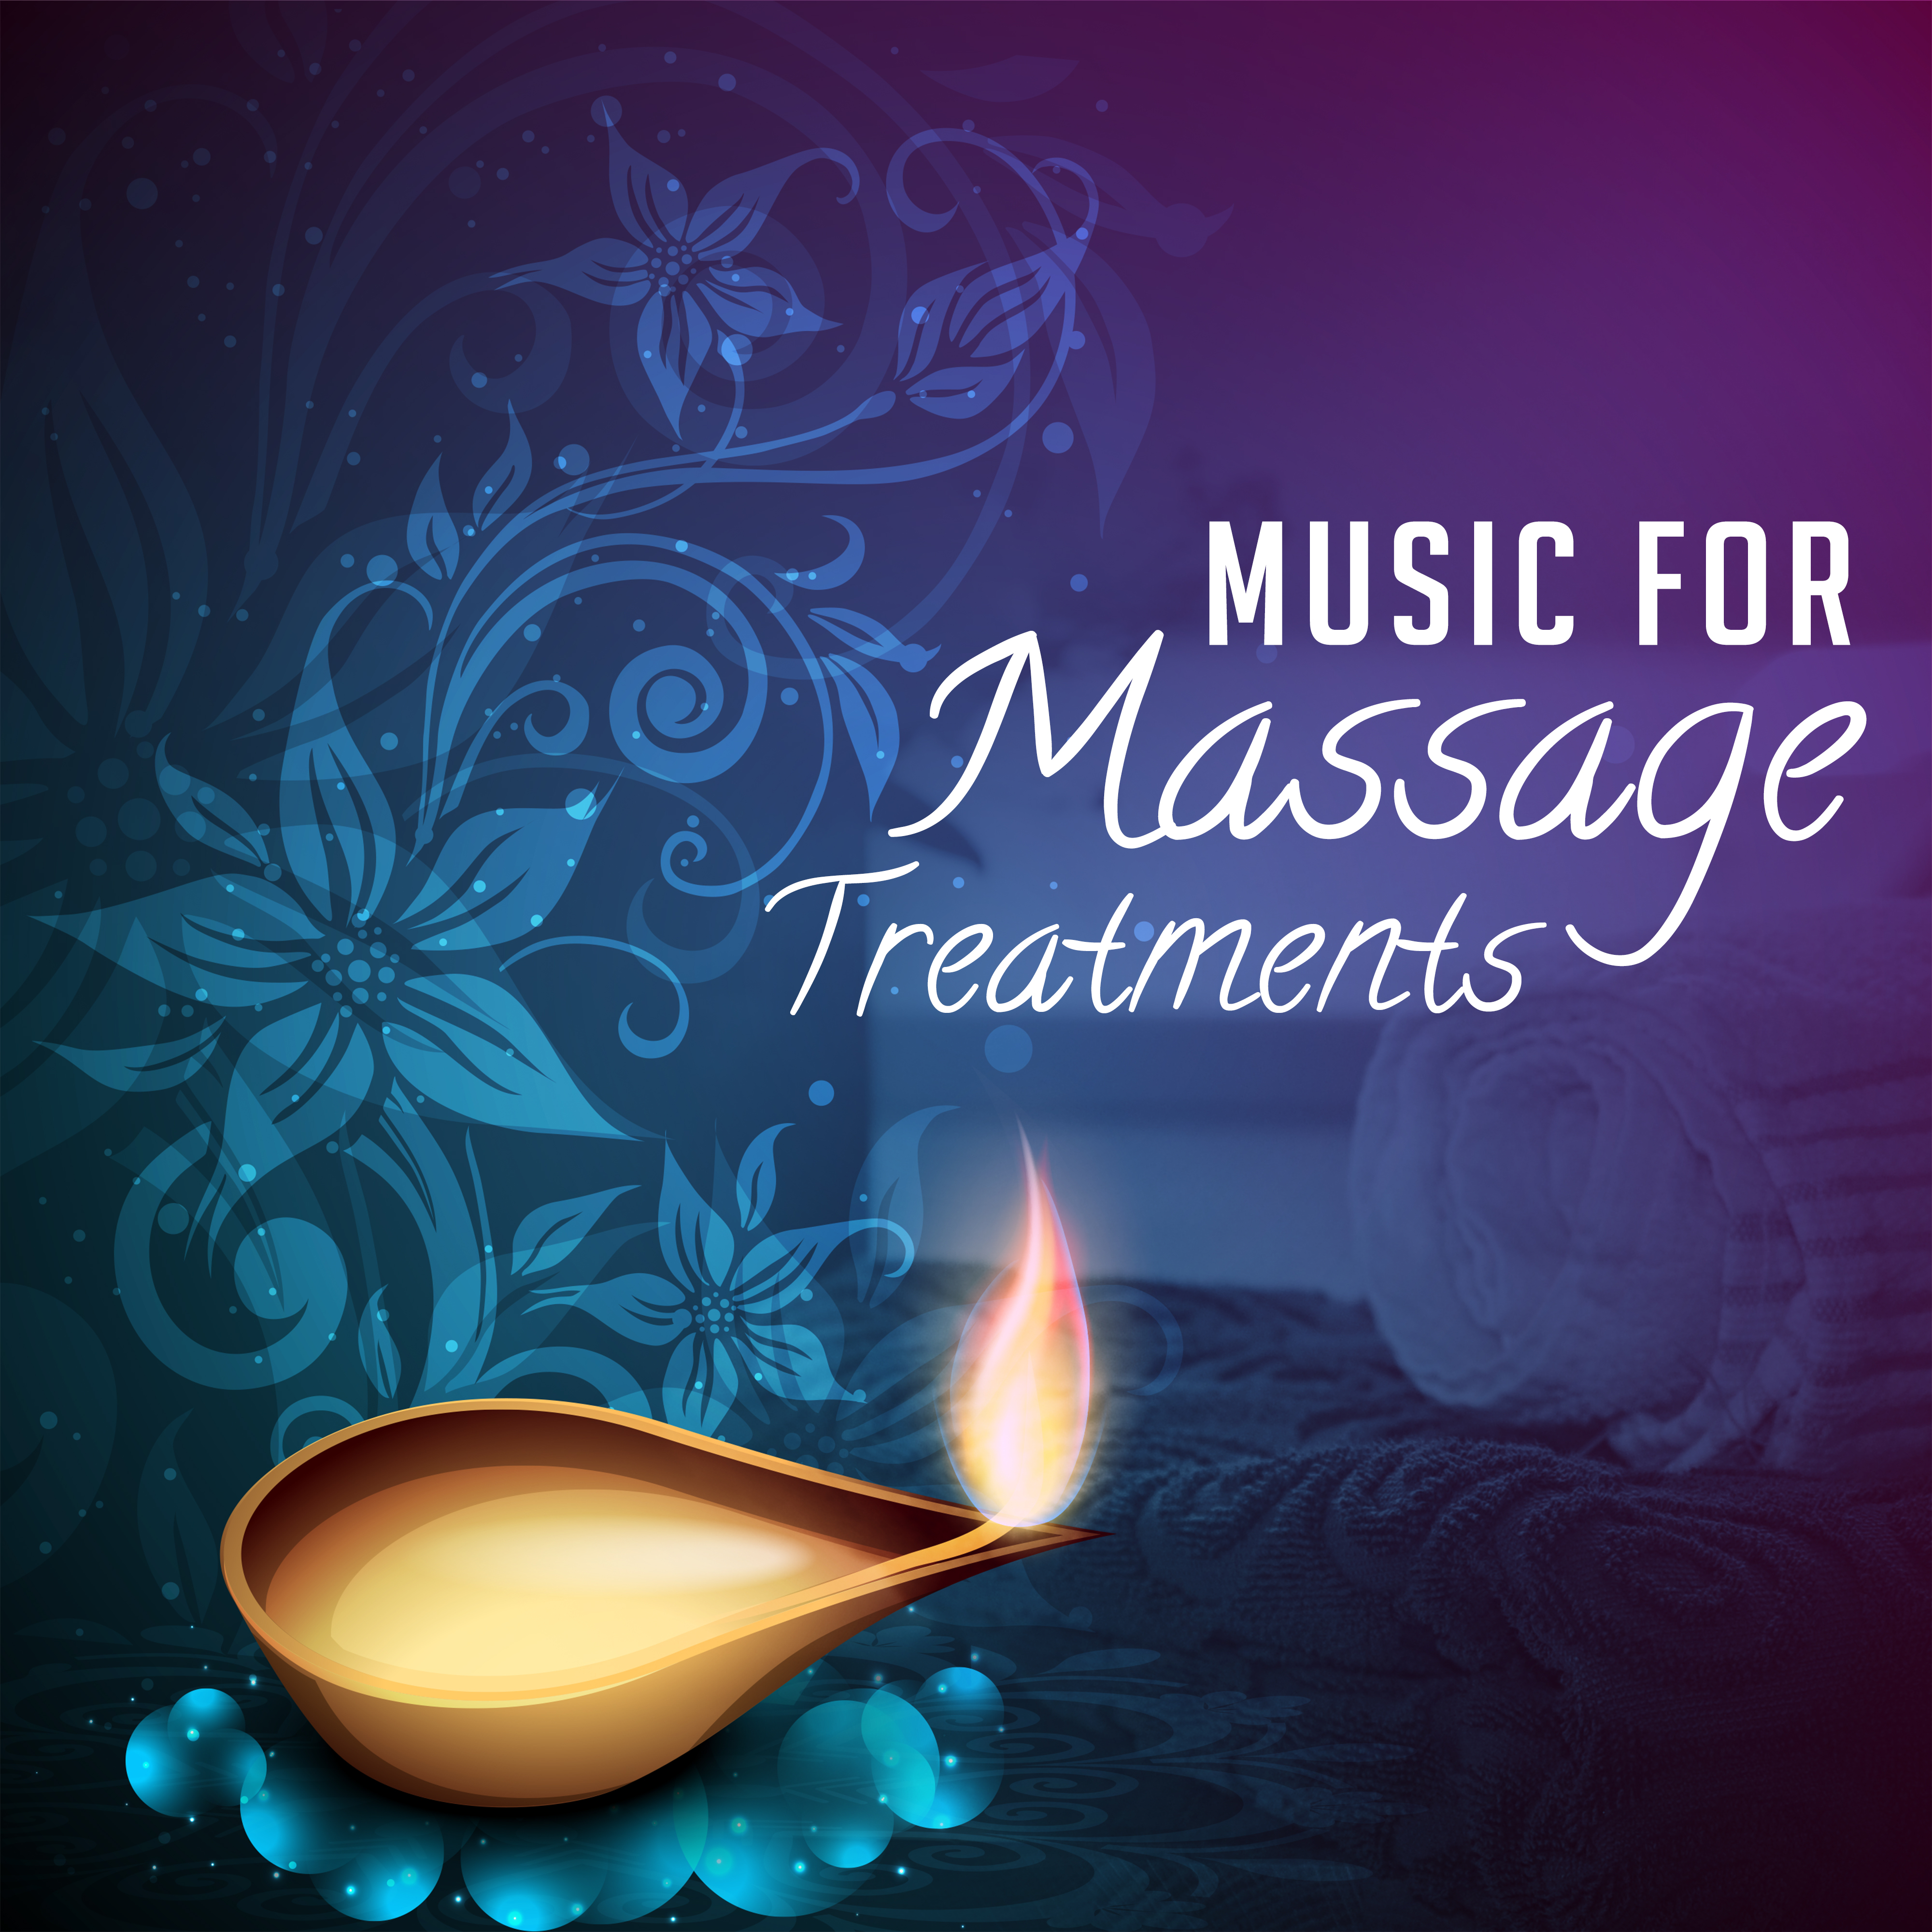 Music for Massage Treatments – Relaxing Music, The Best Background Songs for Spa, Wellness Therapy